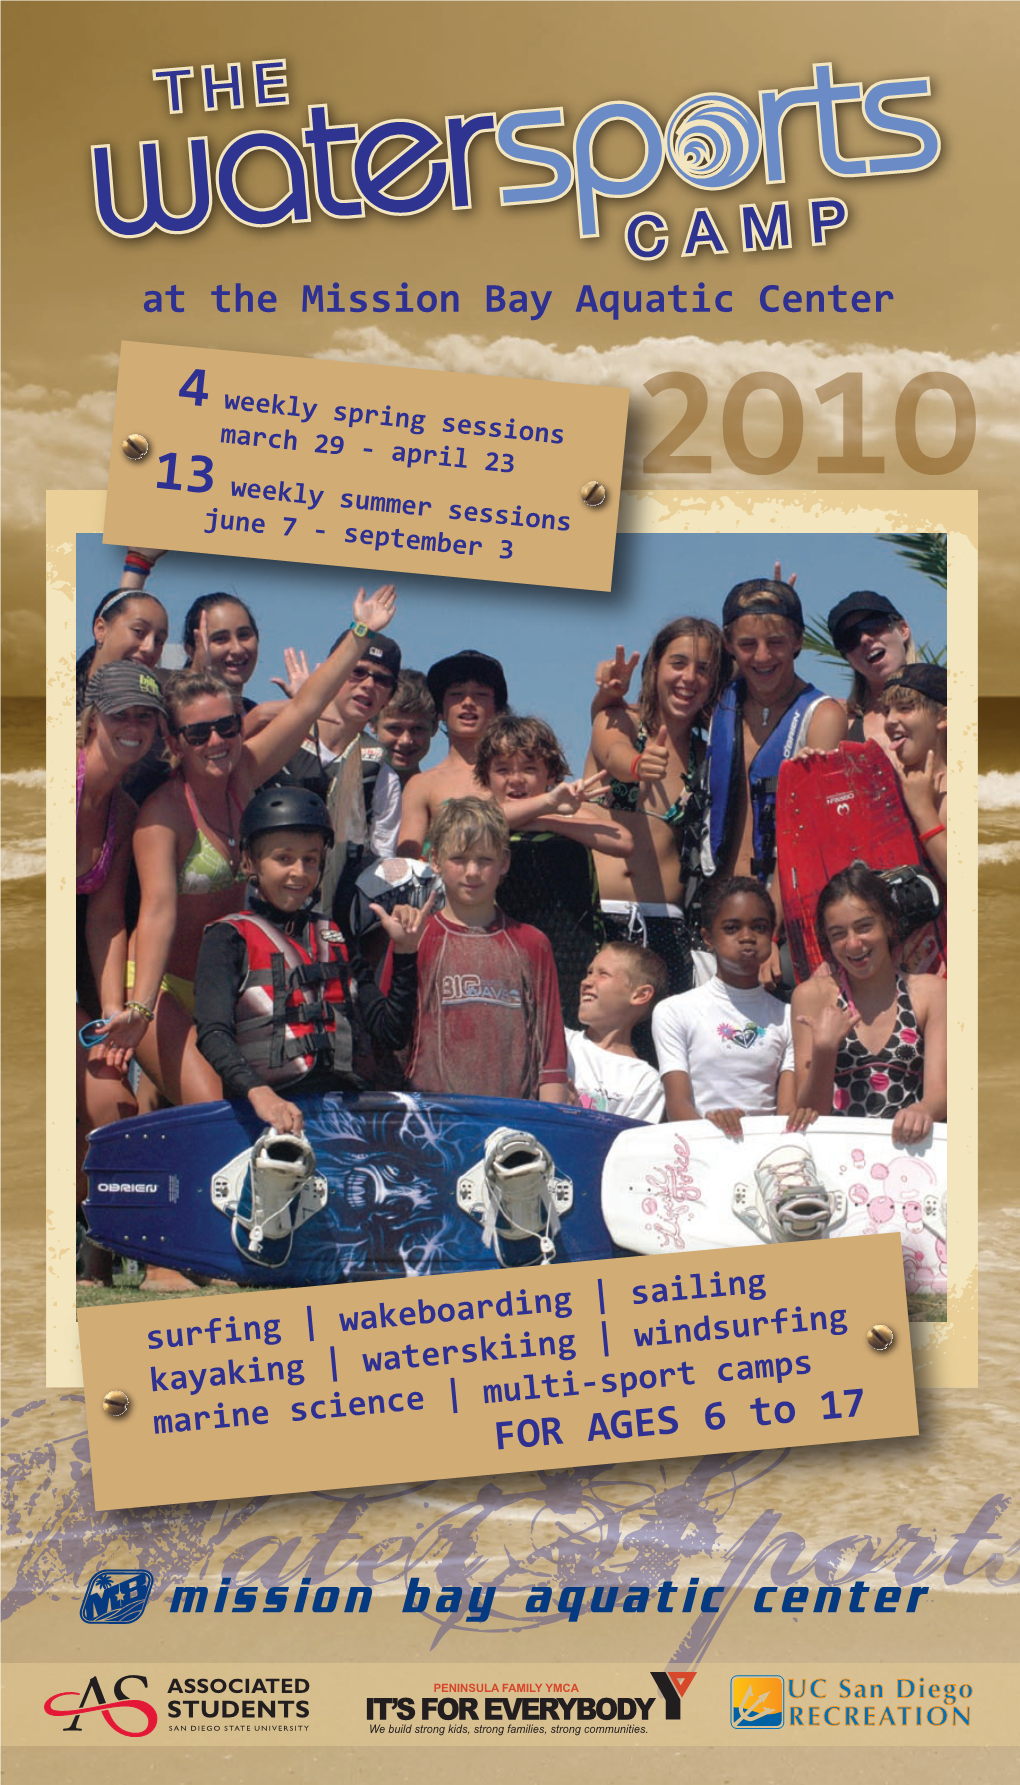 Wakeboarding | Sailing Kayaking | Waterskiing | Windsurfing Marine Science | Multi-Sportfor AGES 6Camps to 17